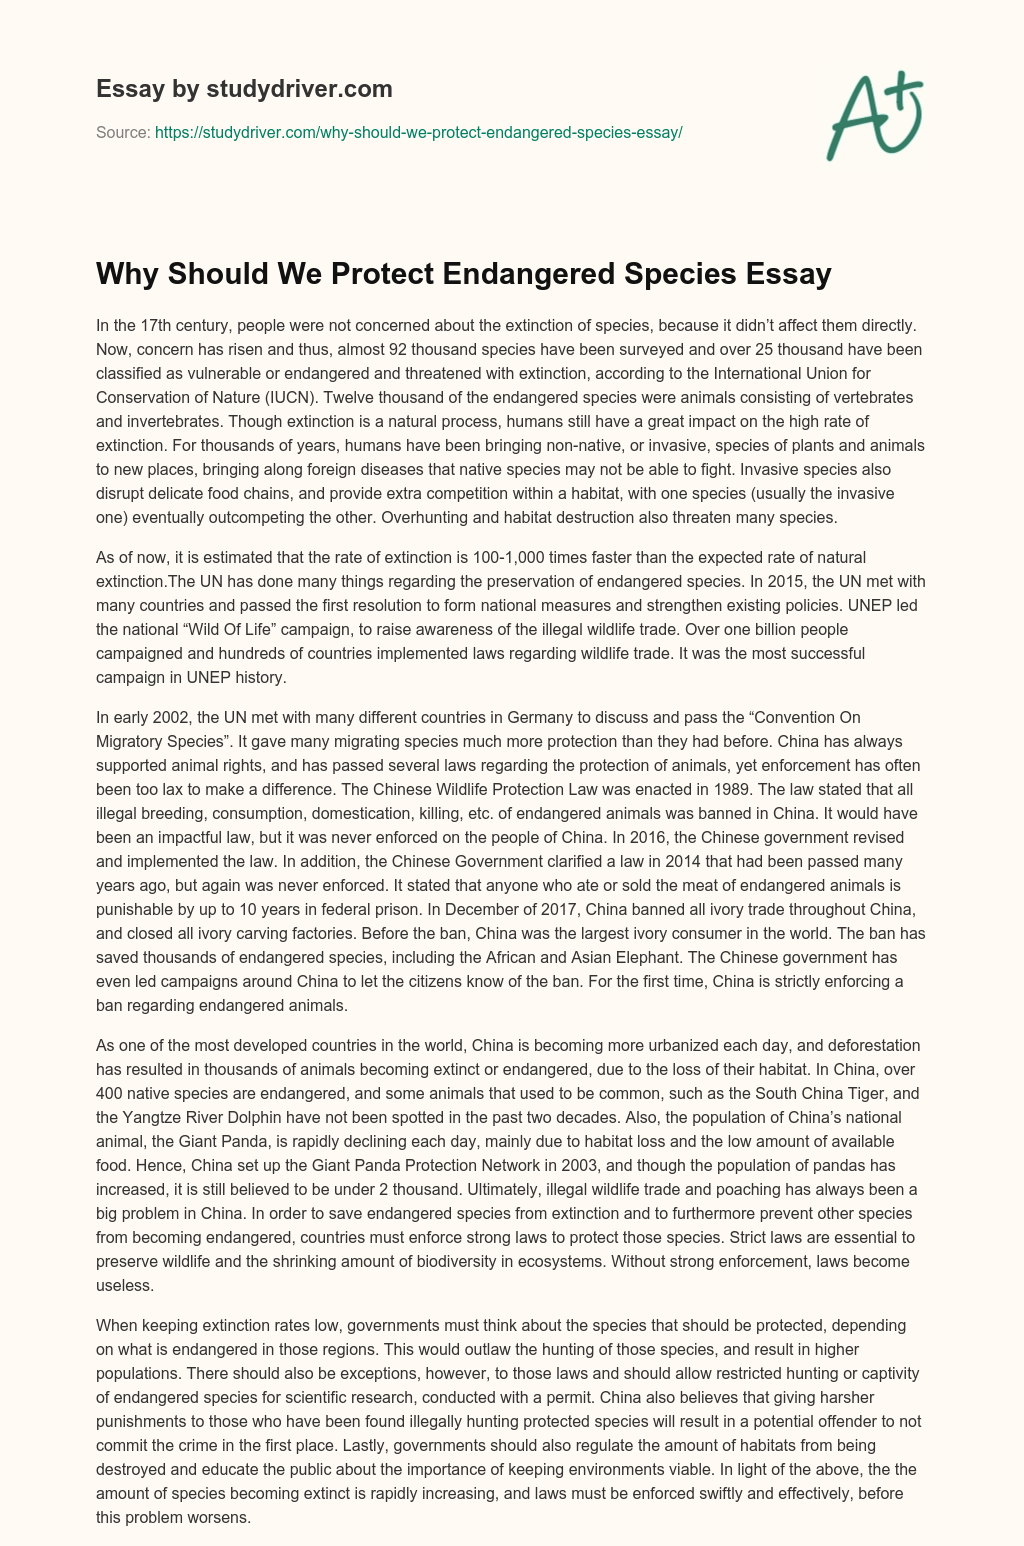 Why should we Protect Endangered Species Essay essay